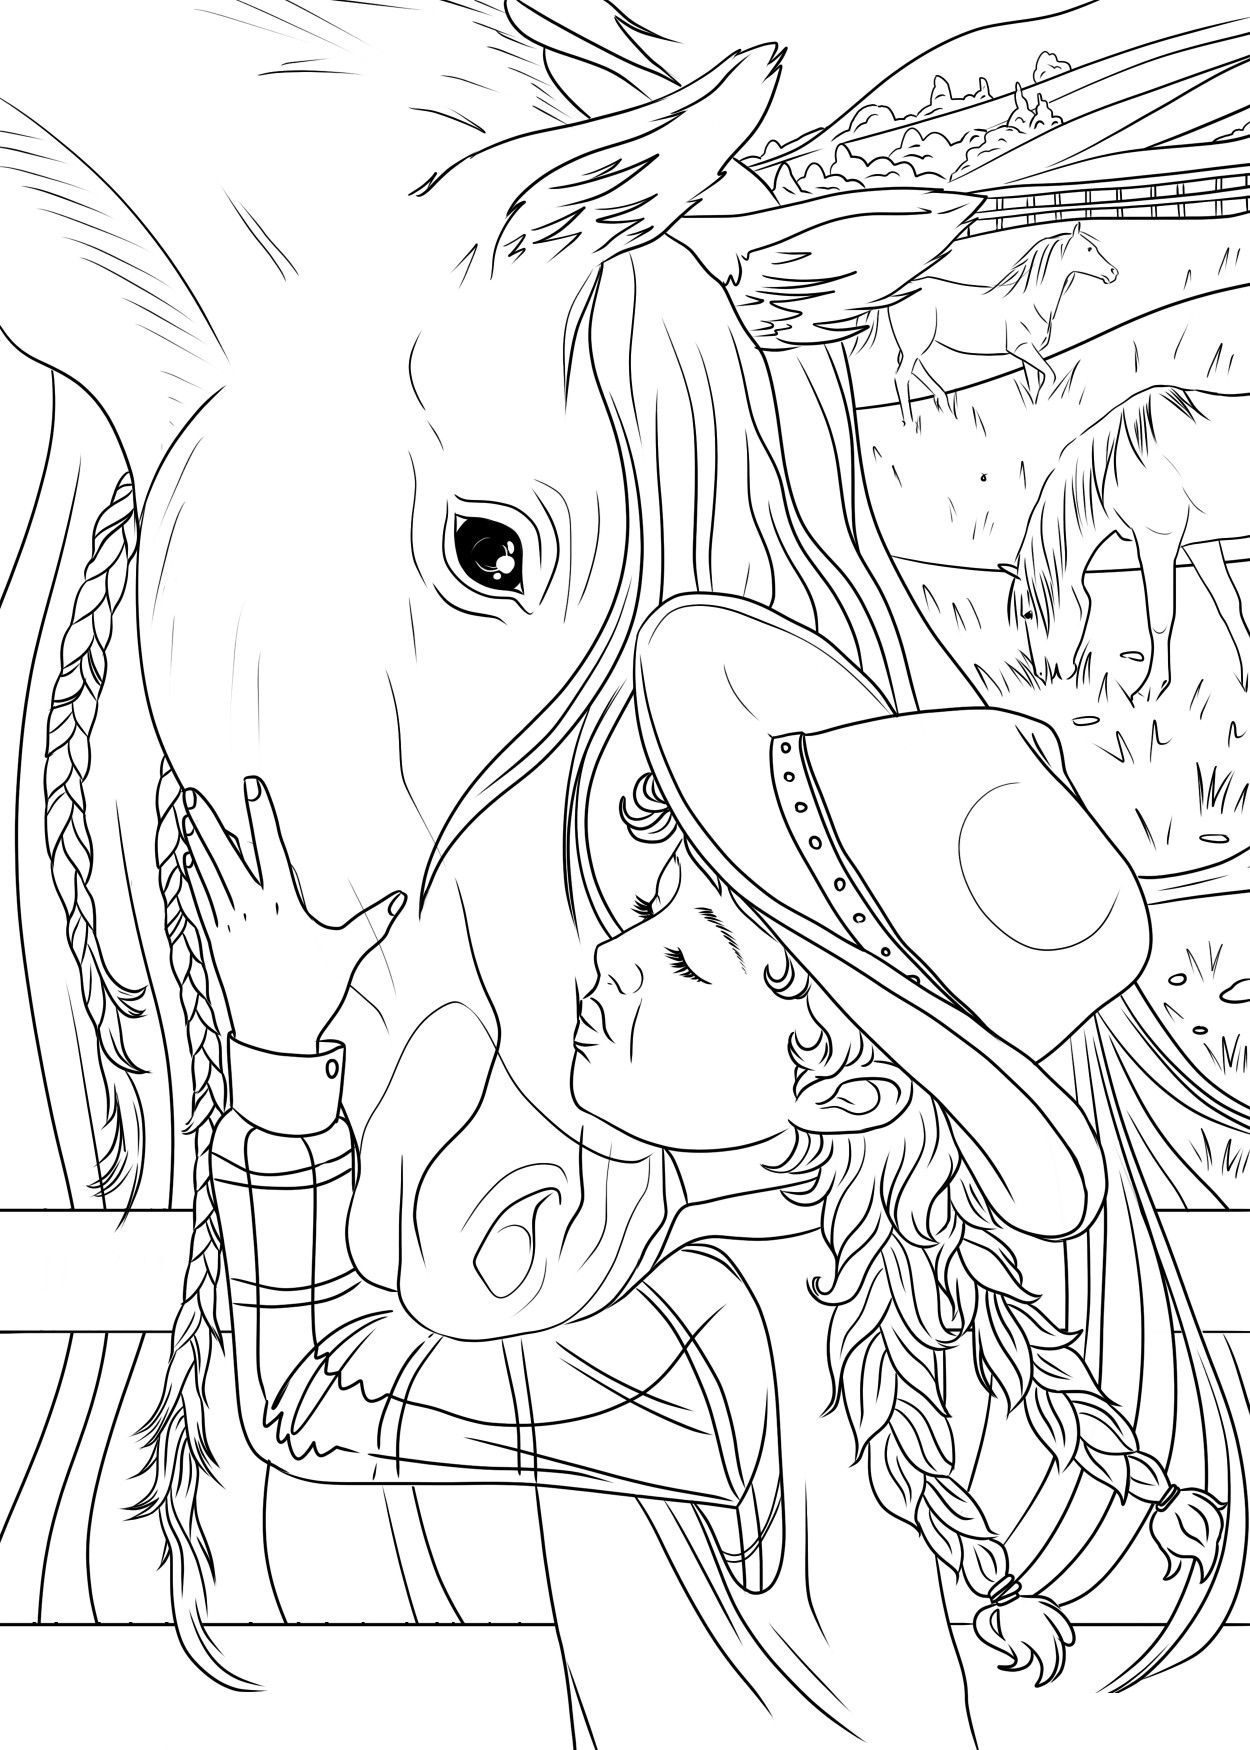 Horse Coloring Pages With People